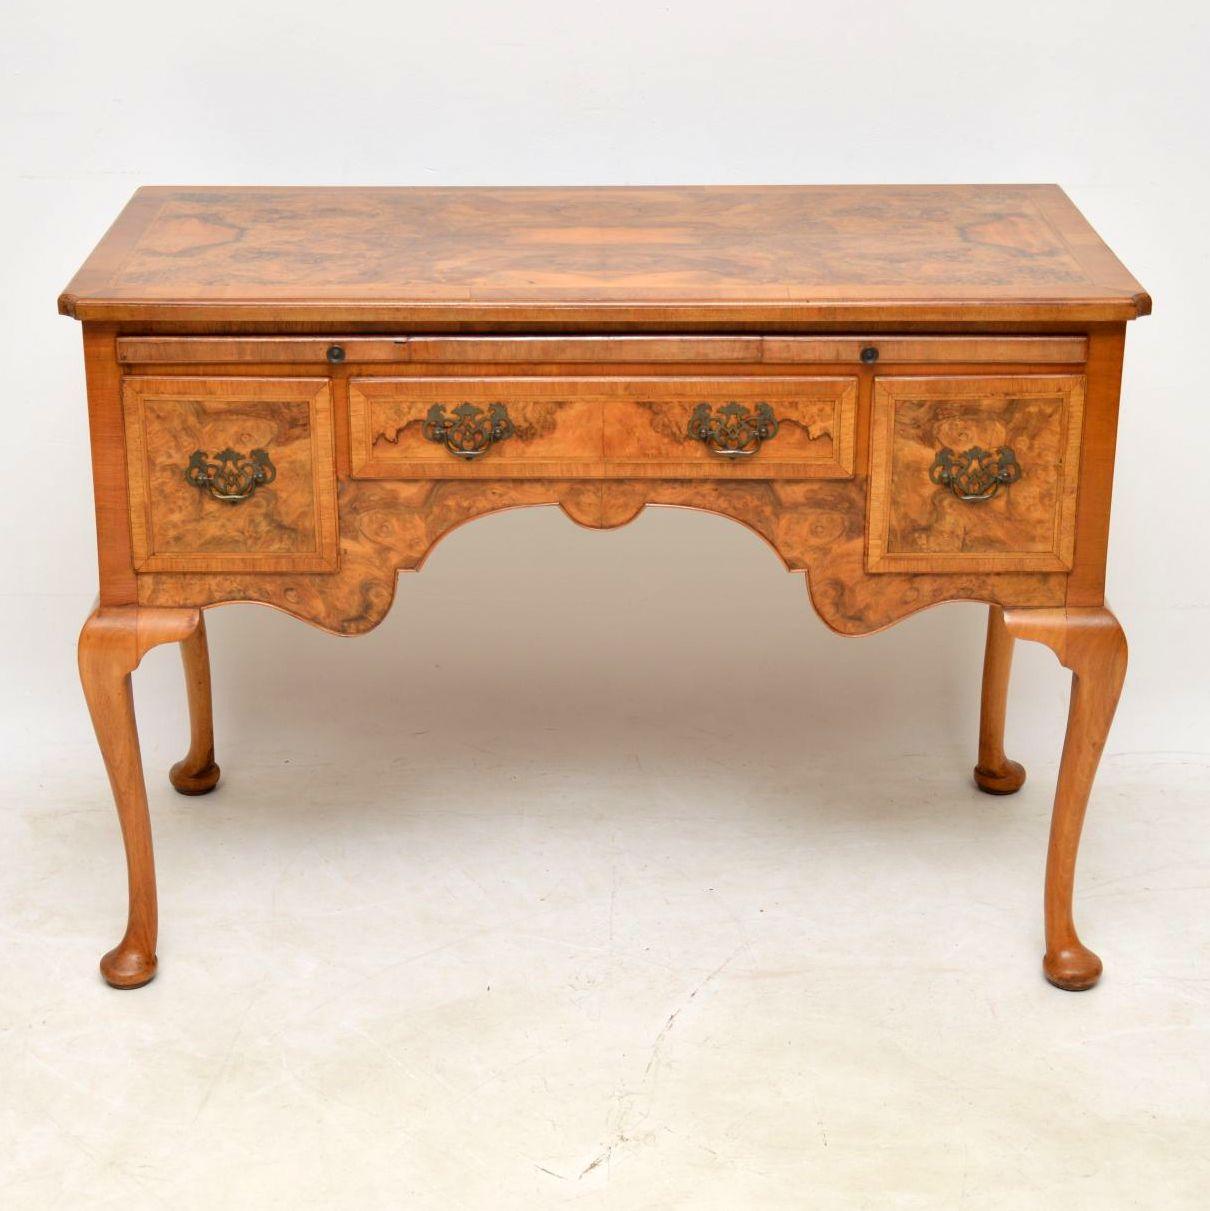 This antique burr walnut desk, side table or dressing table is of very high quality and is a very functional piece of furniture. It’s in excellent condition, with a great colour and dates to circa 1890-1910 period. The top and front has fabulous